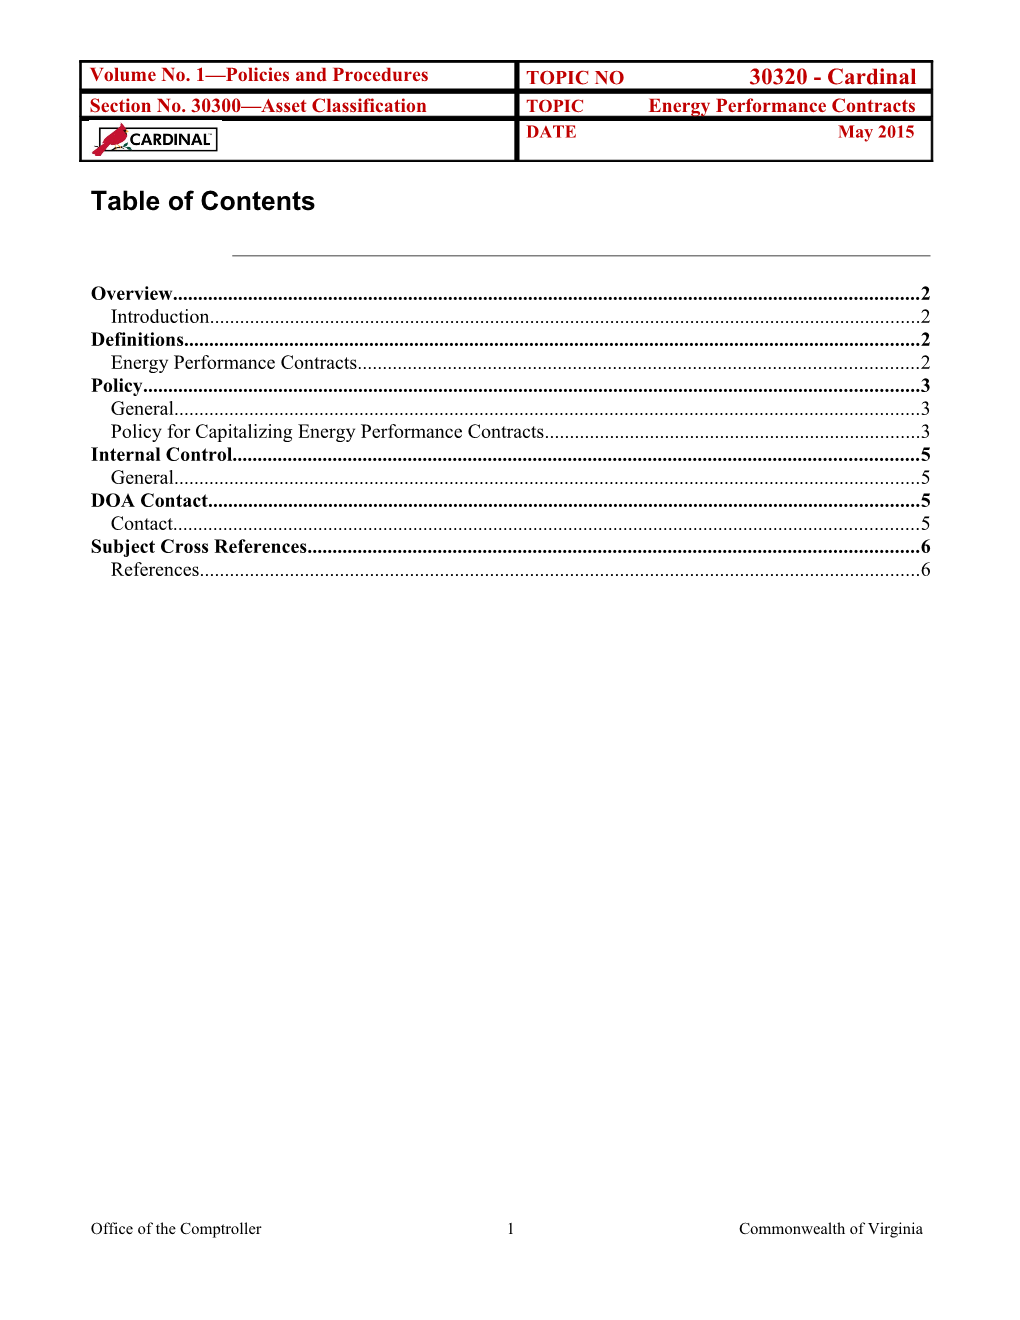 CAPP Manual - 30320 - Cardinal, Asset Classification - Energy Performance Contracts